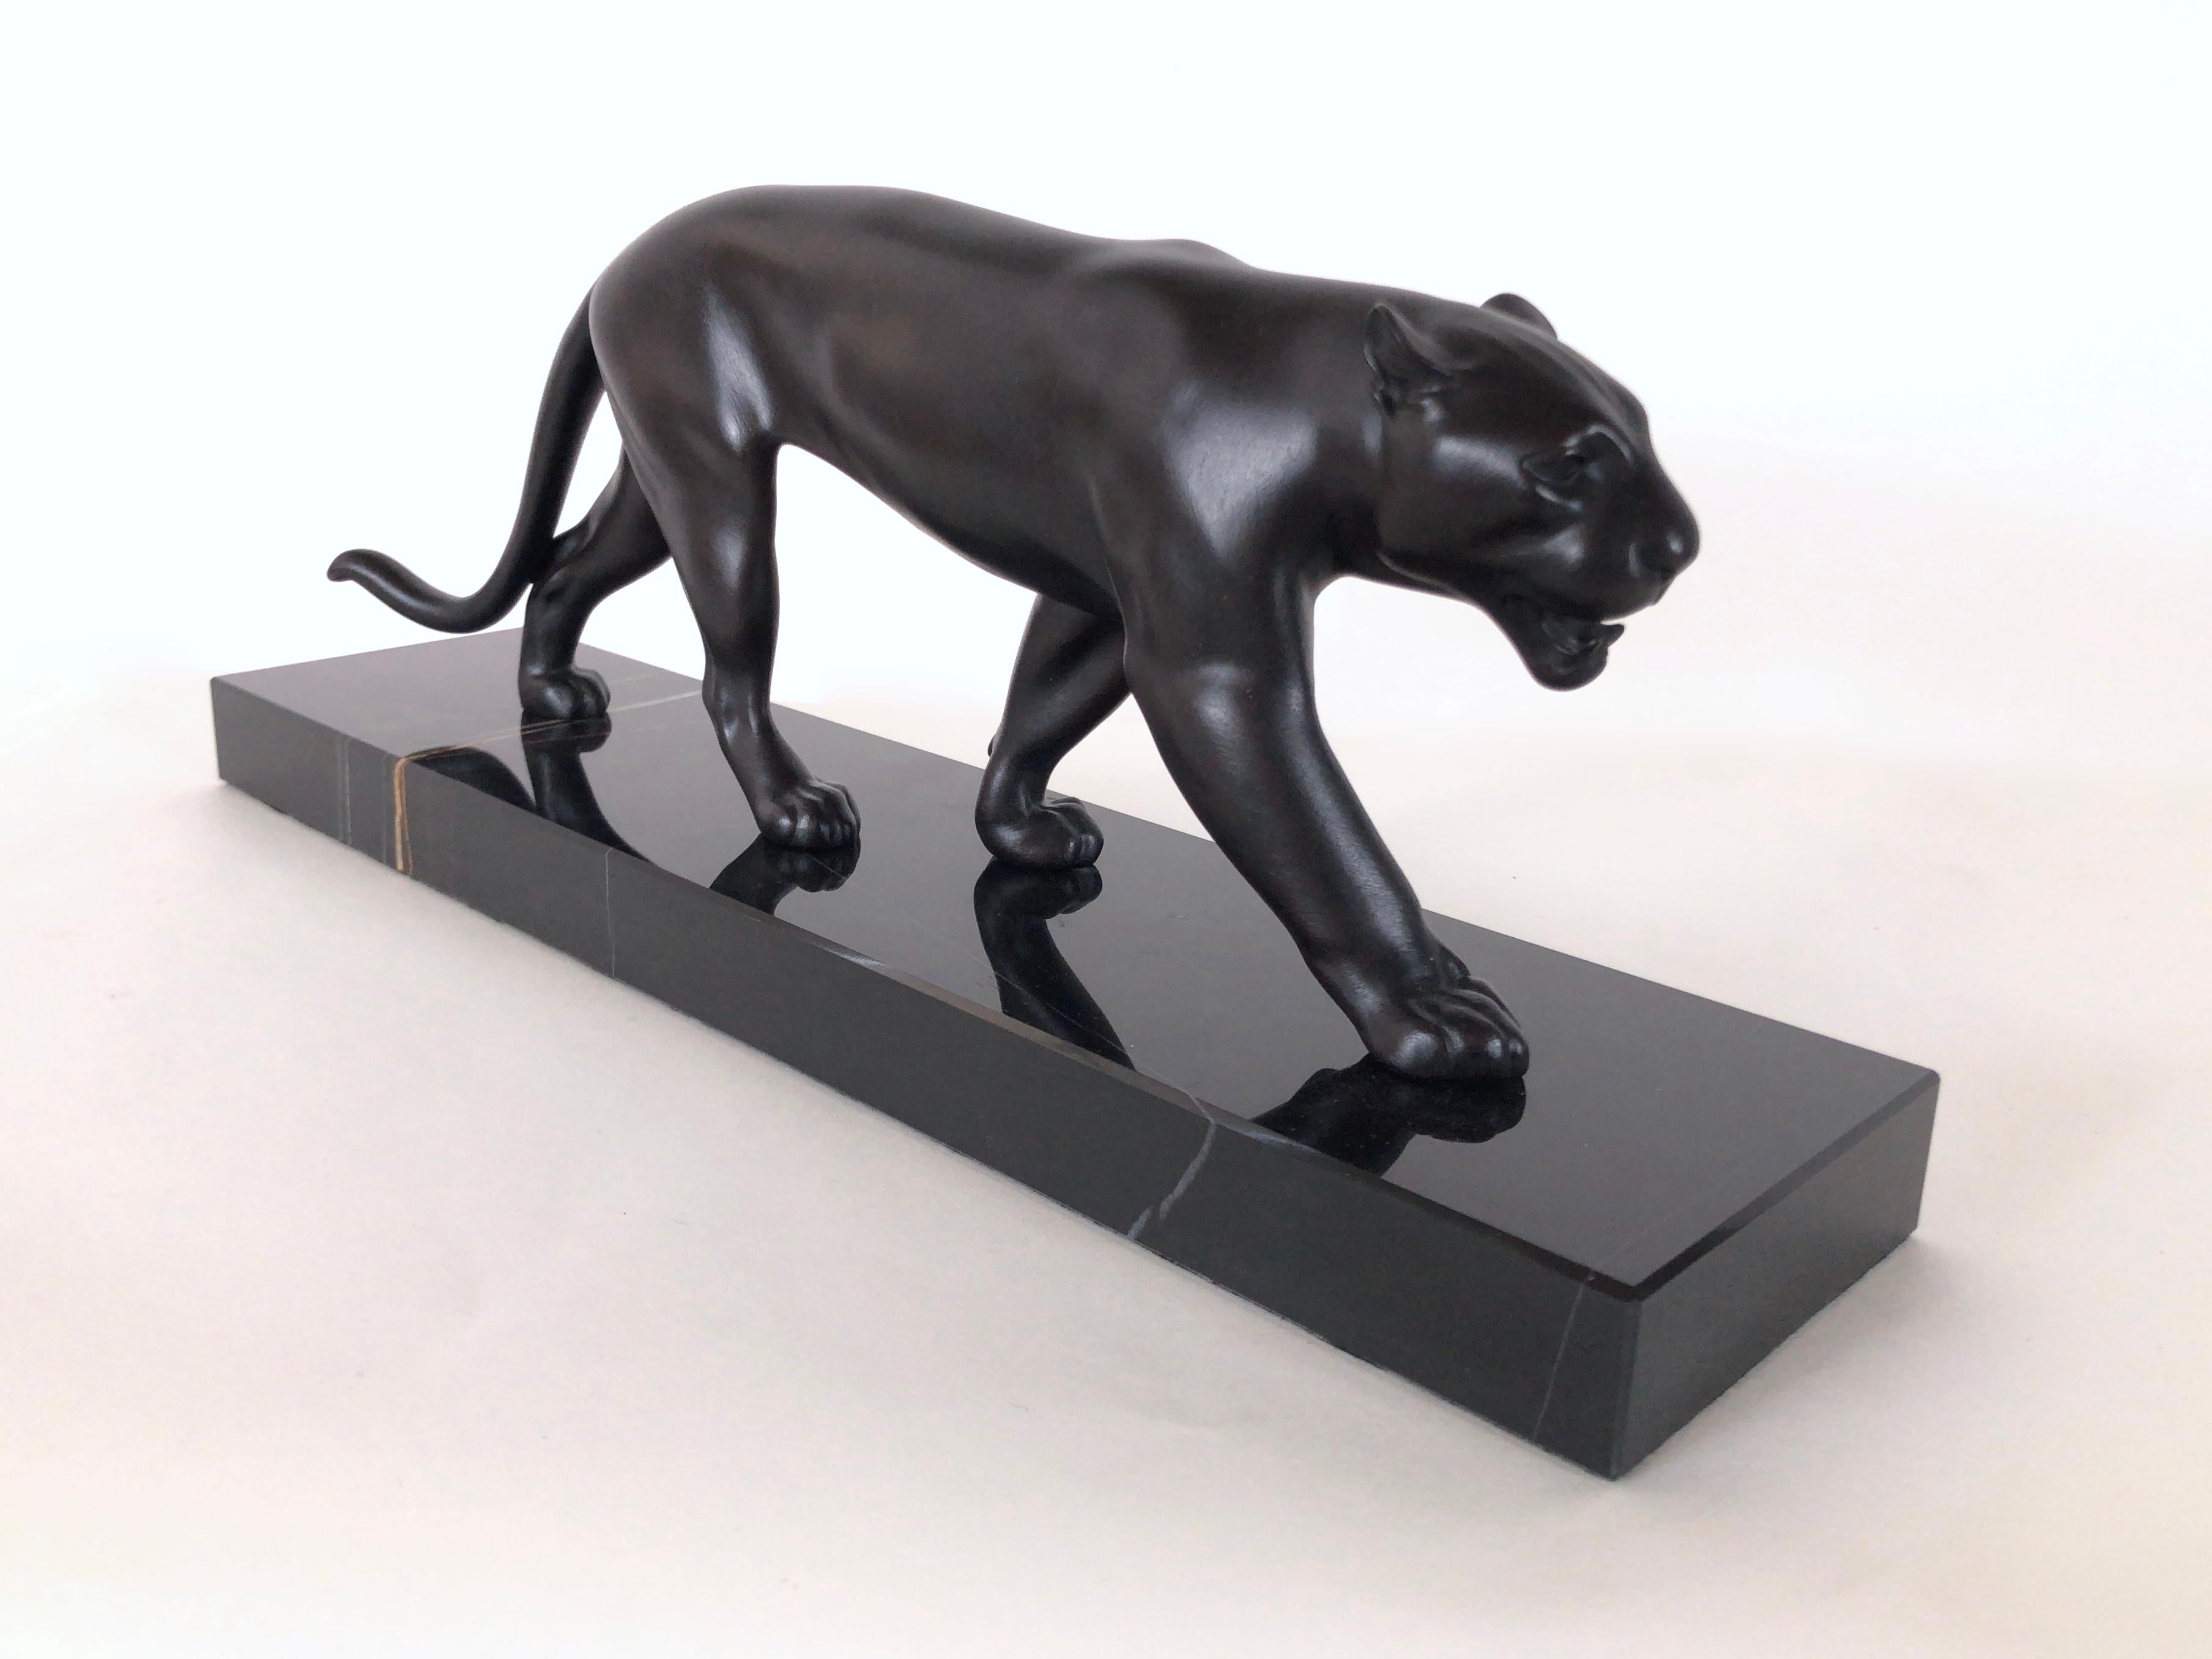 Lion or panther sculpture named “Ouganda”
Original “Max Le Verrier”, signed
Designed in France during the roaring 1920s by “Max Le Verrier” (1891-1973)
Art Deco style, France 

Materials: patinated spelter (French: régule), marble base
Socle